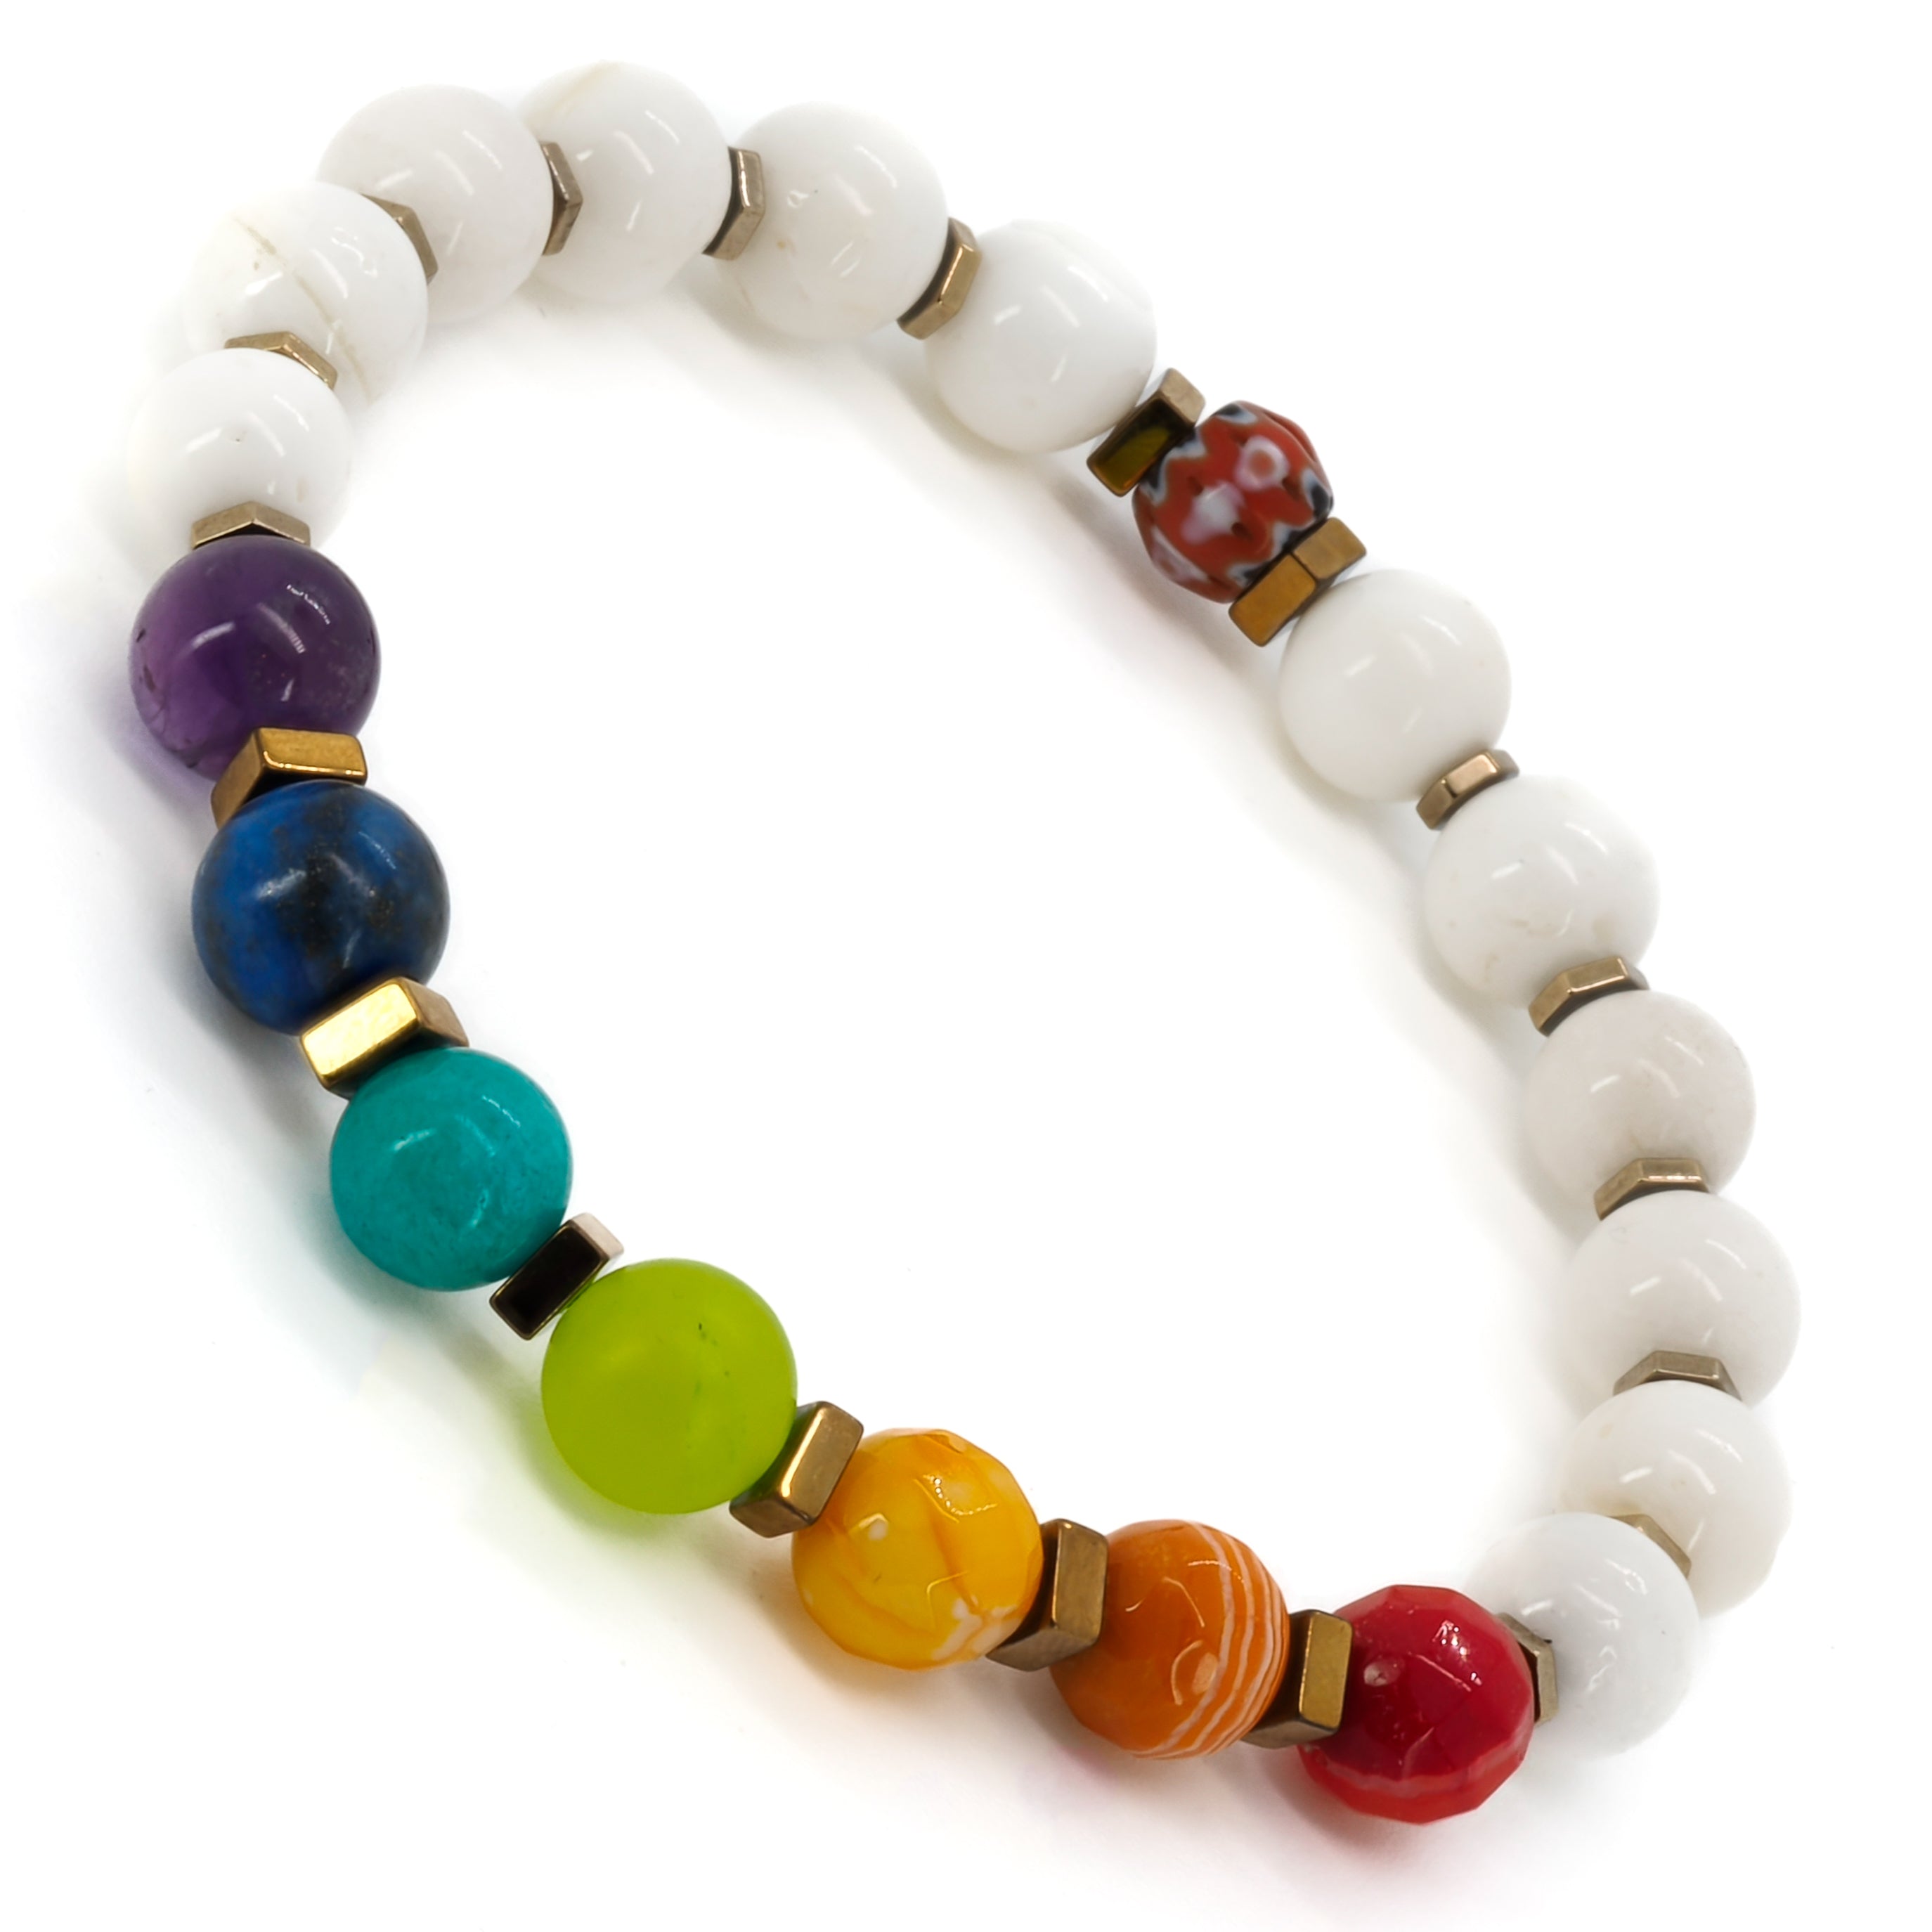 Chakra Bracelet featuring white agate and chakra colors for harmony and well-being.